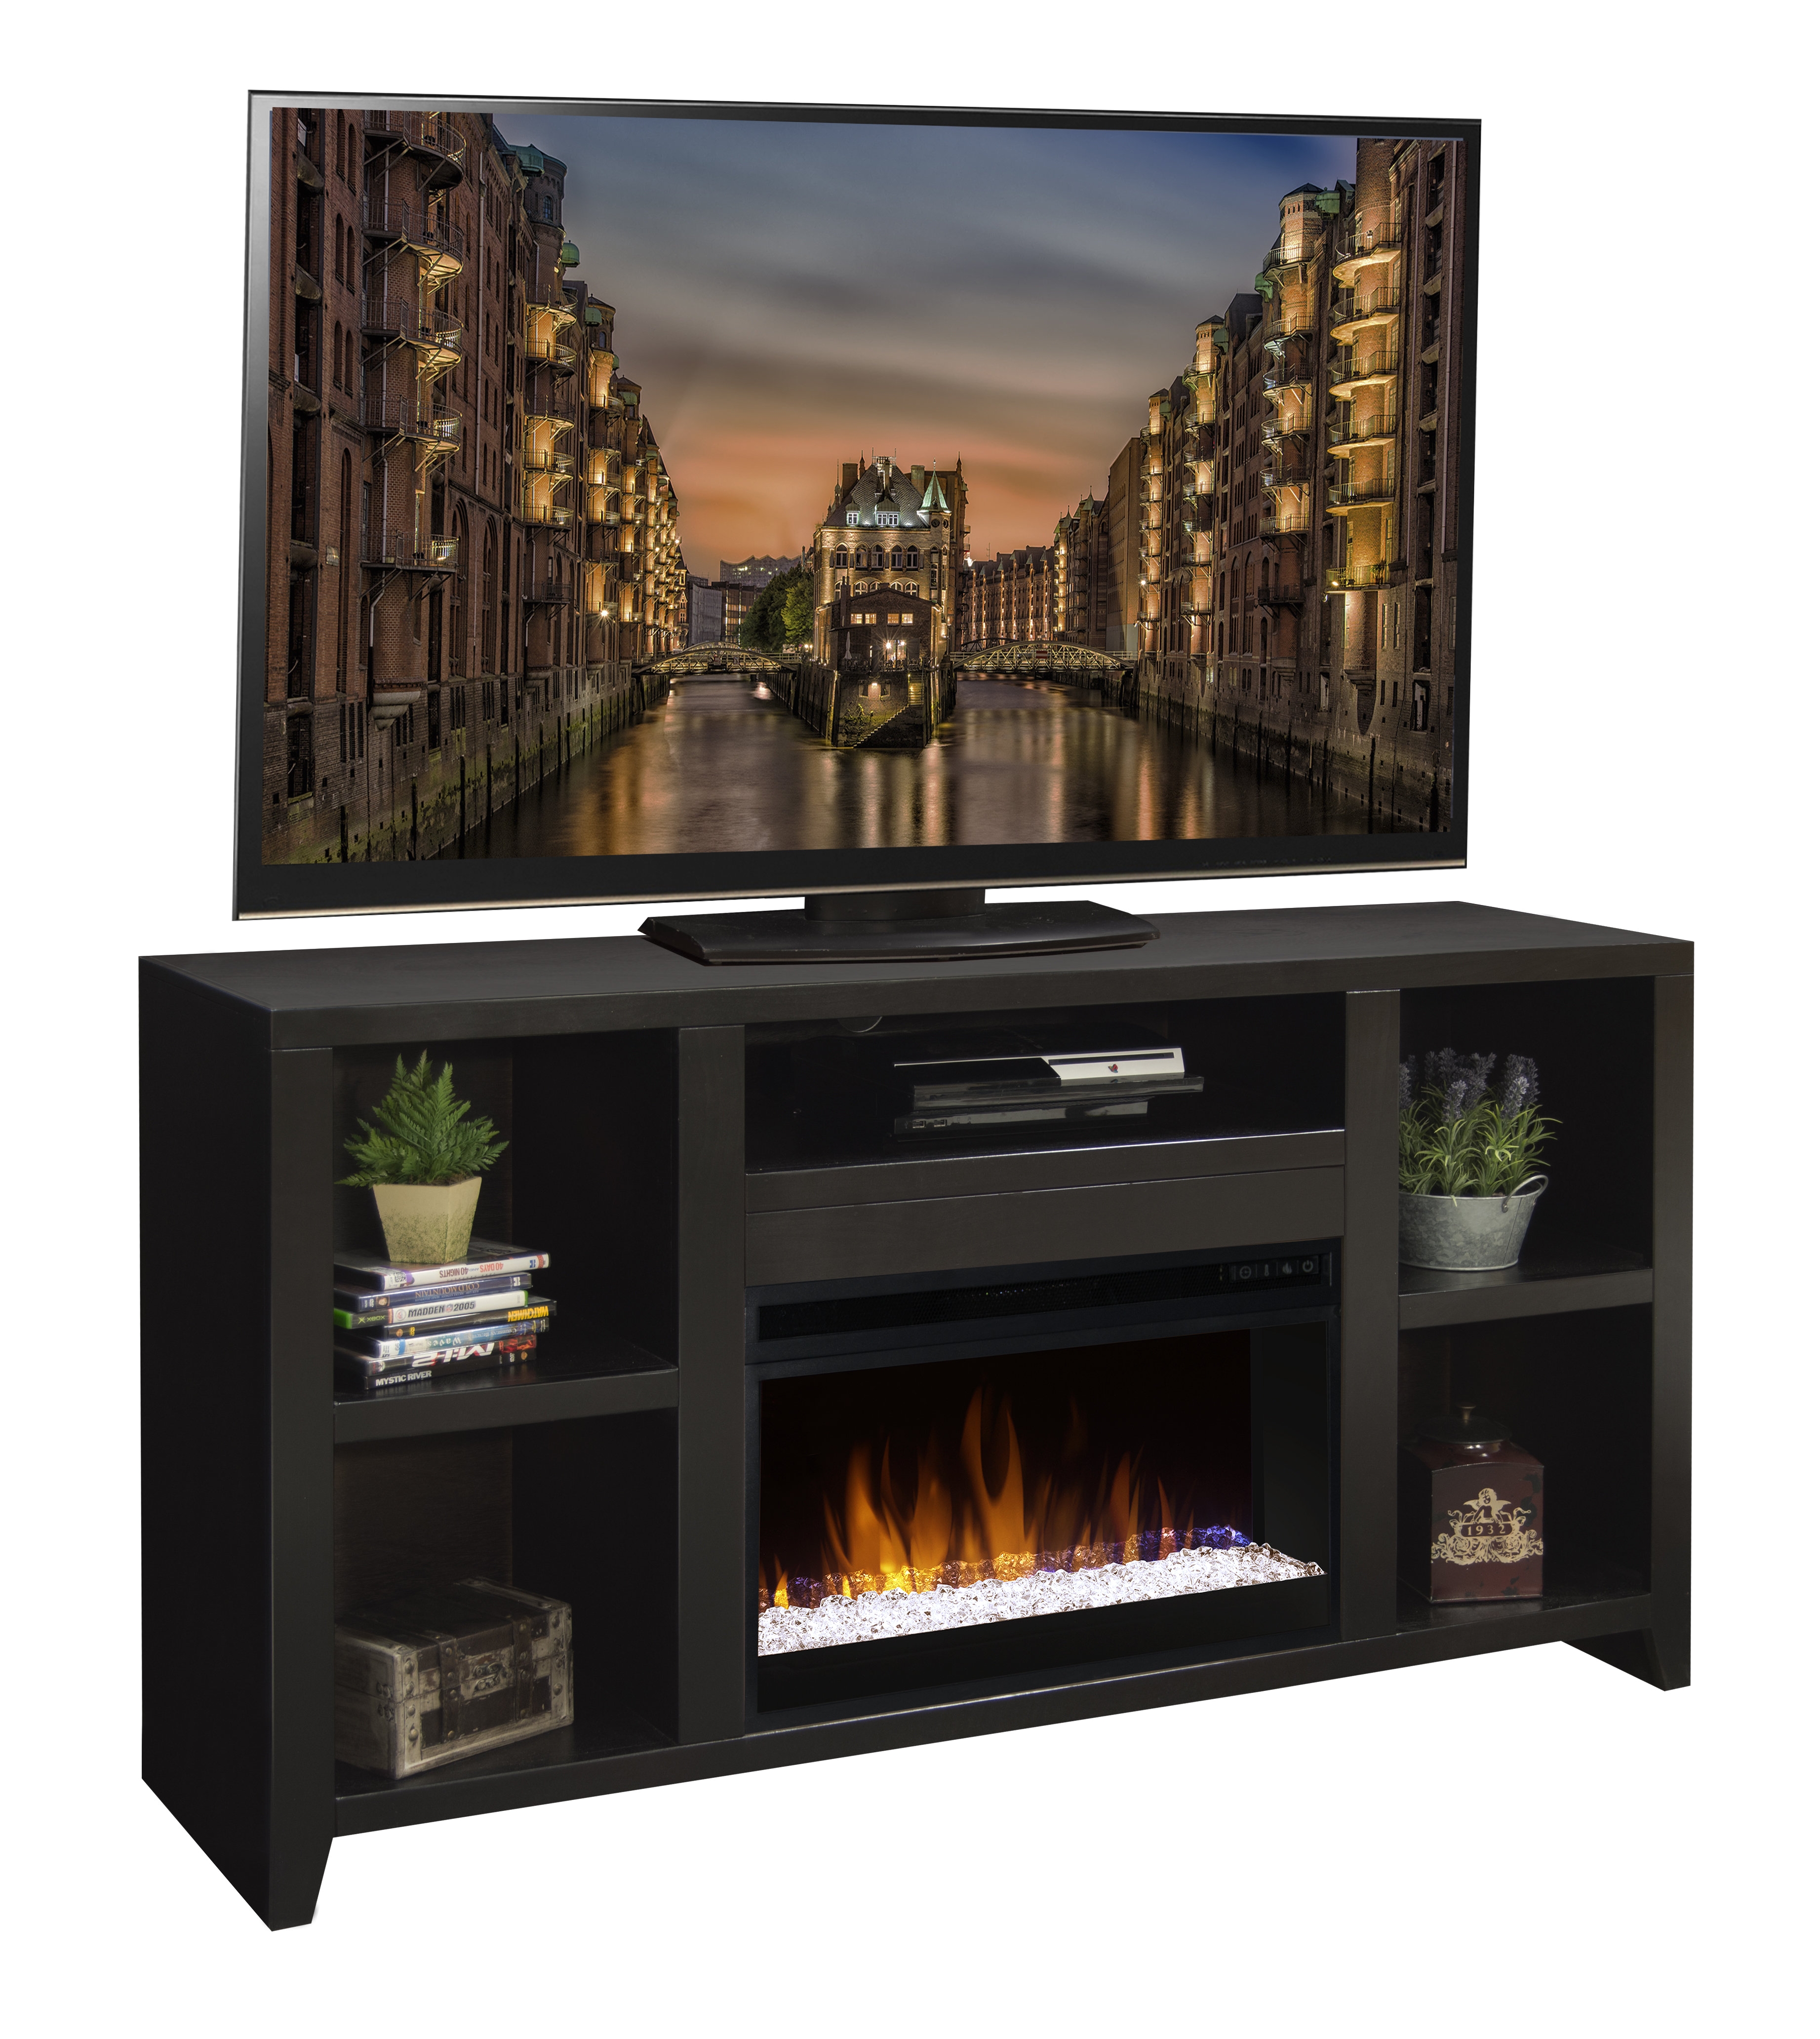 fireplace doors online reviews darby home co garretson 62 tv stand with fireplace reviews wayfair of fireplace doors online reviews